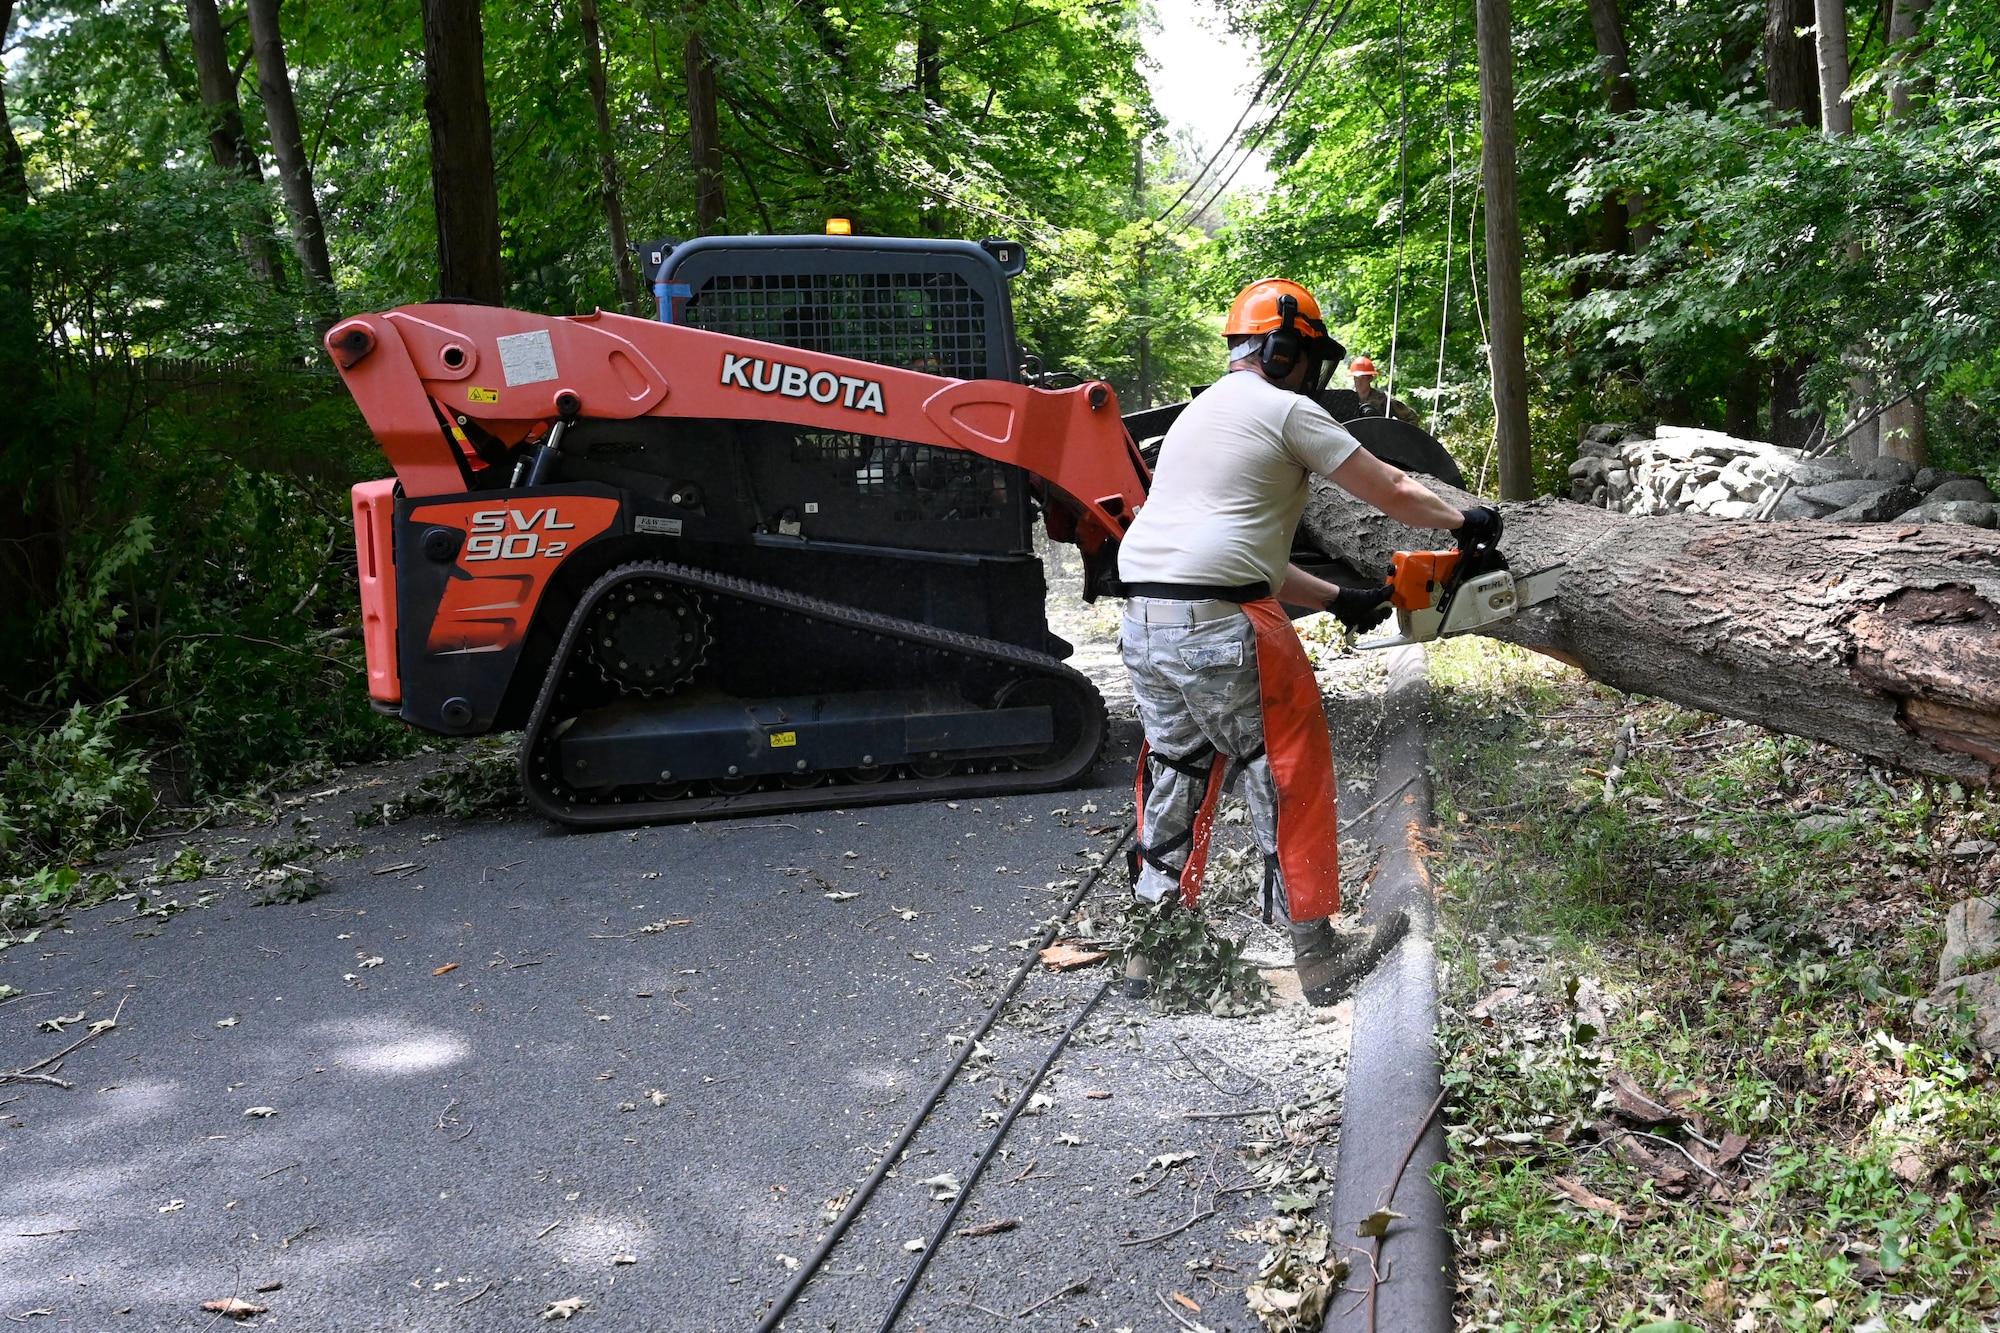 Air Force Master Sgt. Jon Delaney, member of the 103rd Civil Engineer Squadron, uses a chainsaw to cut a tree that fell into a roadway during Hurricane Isaias, August 7, 2020, Fairfield, Connecticut. Delaney and other members of the 103rd CES removed fallen trees and other debris  from roadways as part of Connecticut's emergency response to Isaias. (U.S. Air National Guard photo by Tech. Sgt. Tamara R. Dabney)